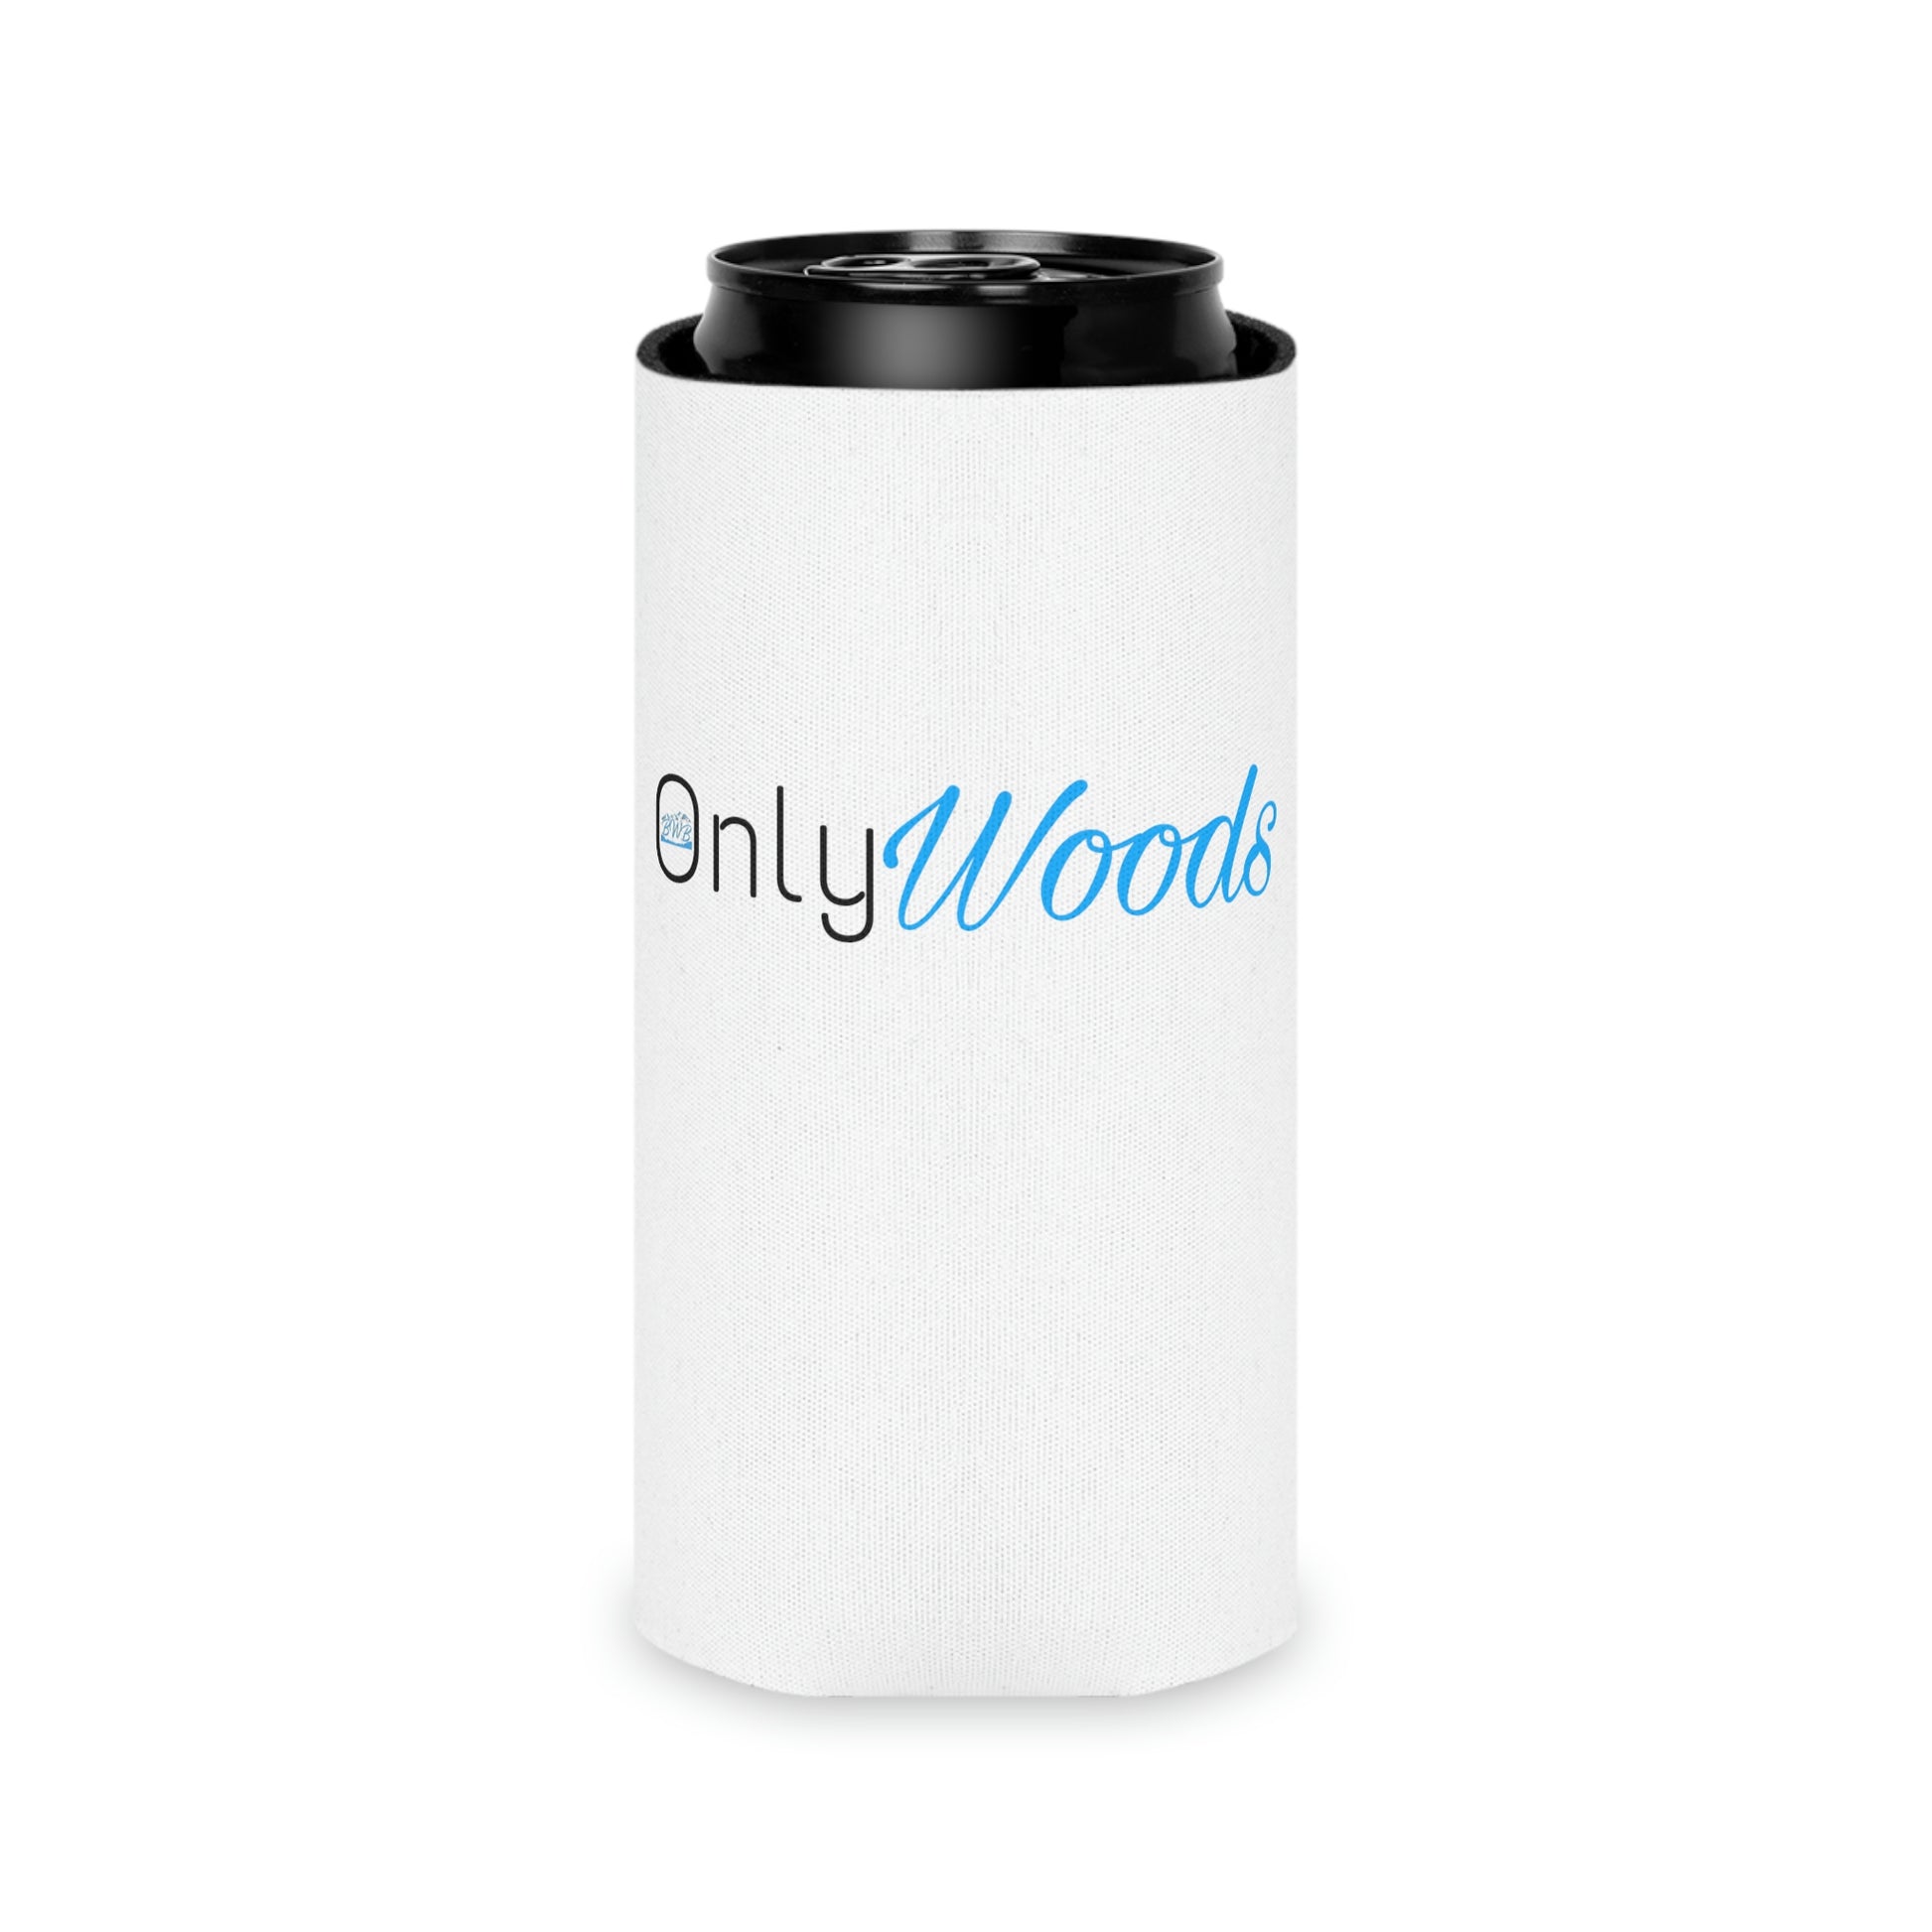 OnlyWoods Coozie - Backwoods Branding Co.